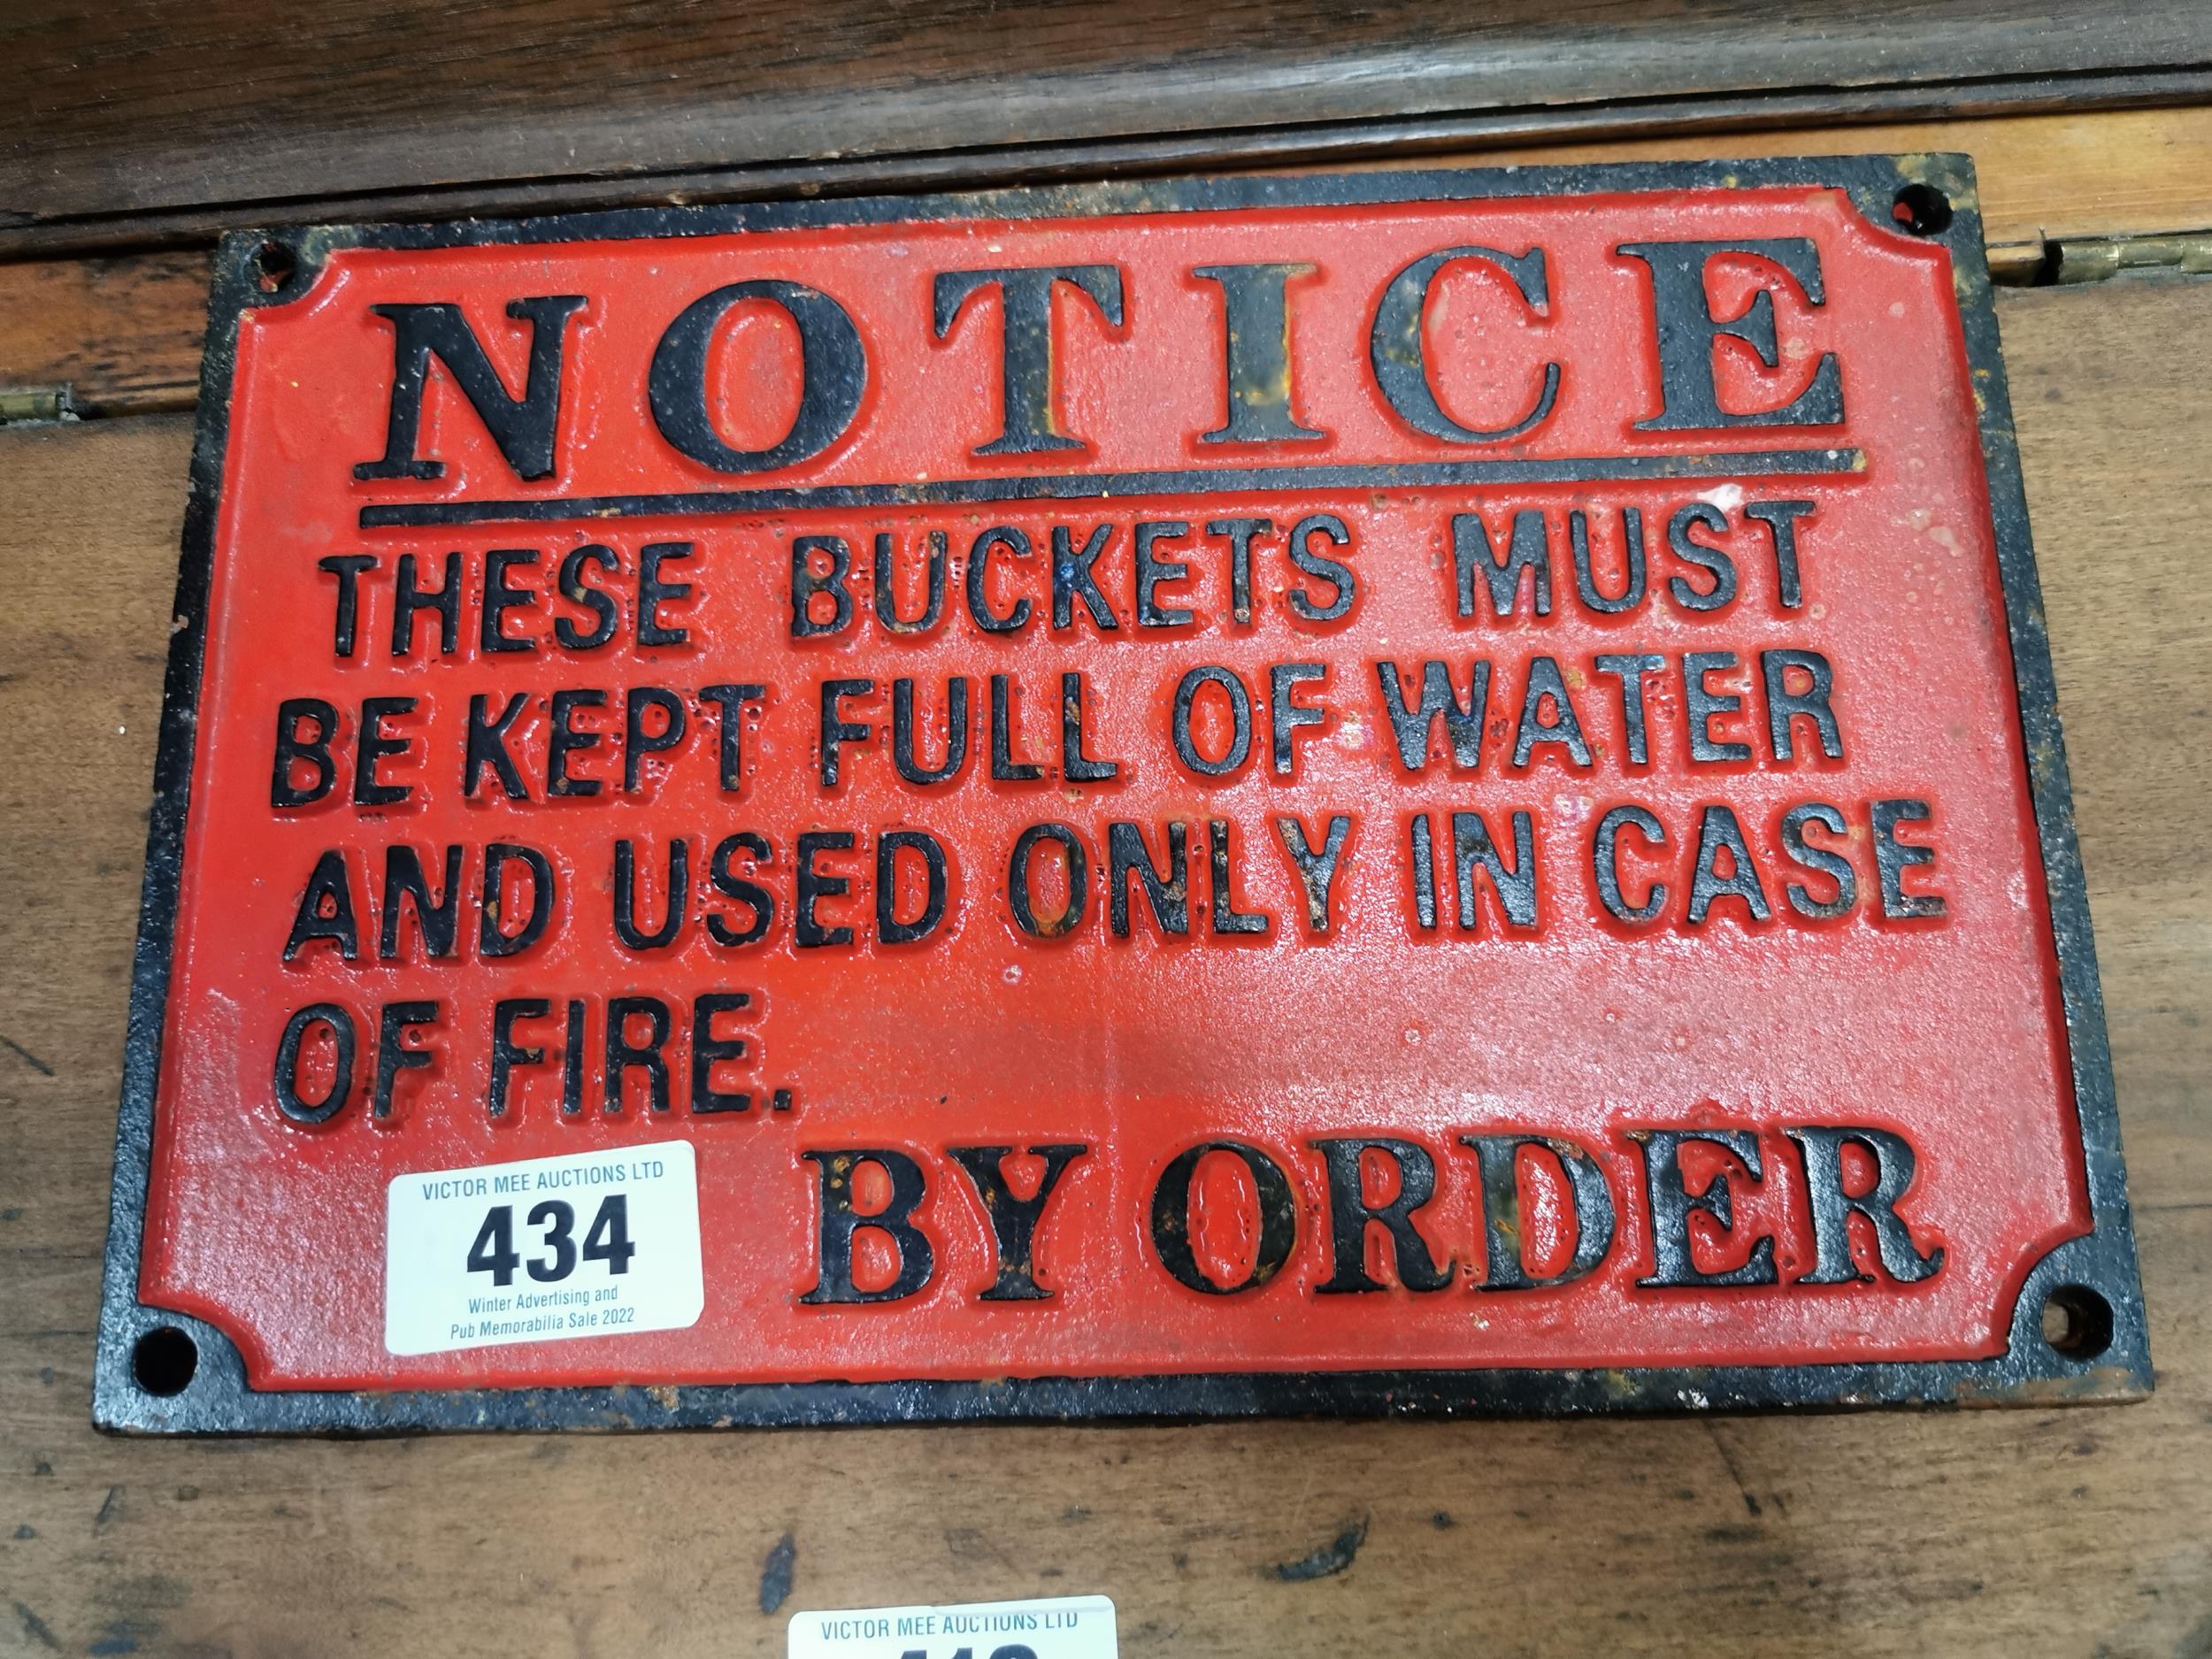 These Buckets Must Be Kept Full Of Water And Only Used In Case Of Fire cast iron sign. { 20 cm H x